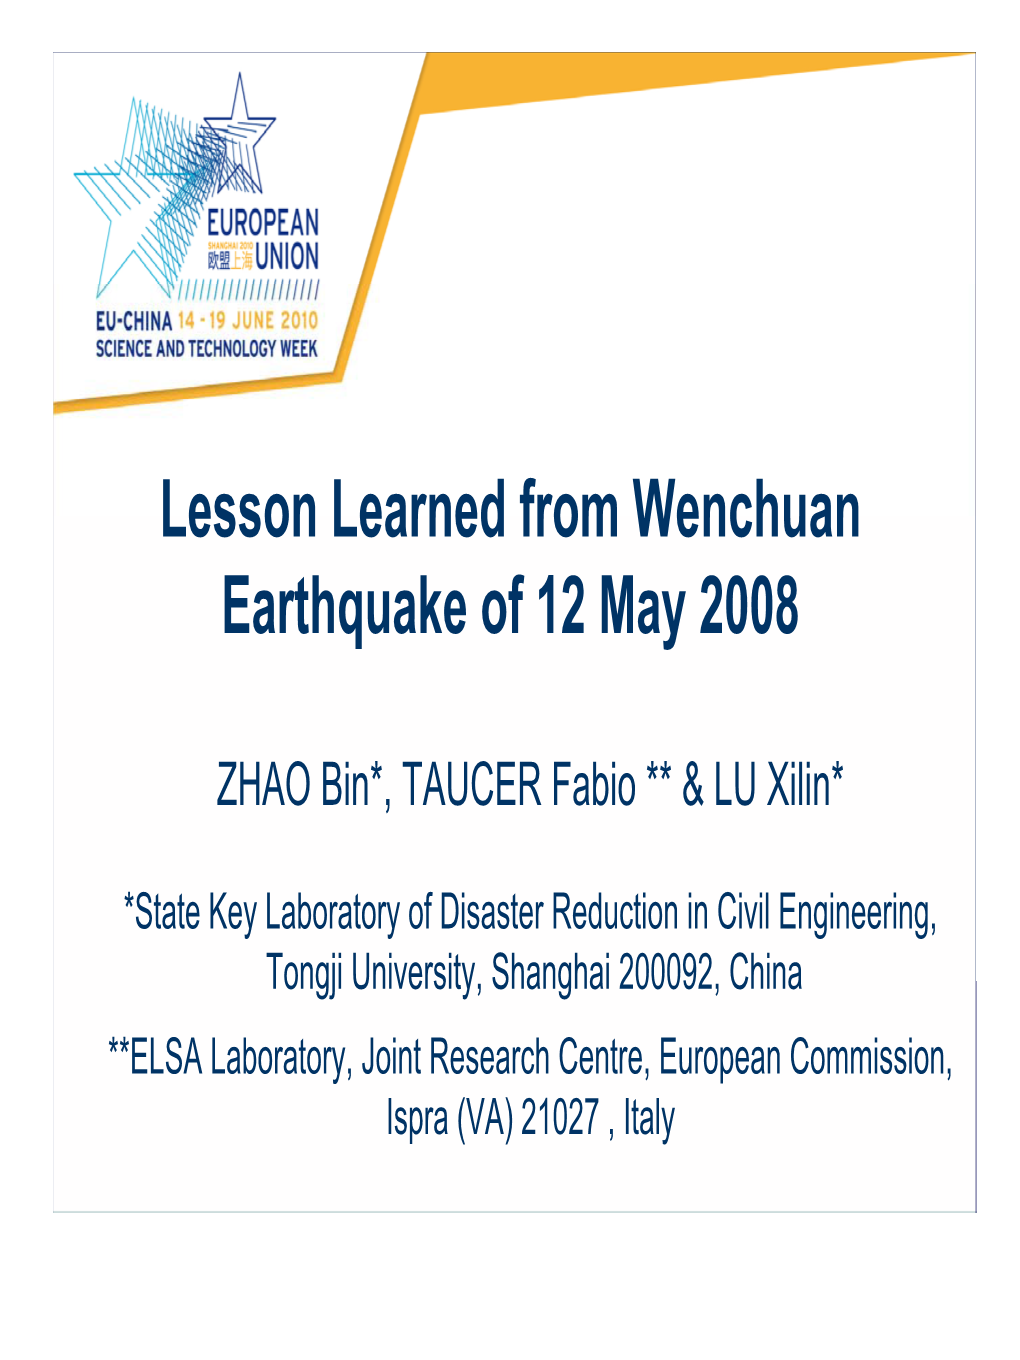 Lesson Learned from Wenchuan Earthquake of 12 May 2008